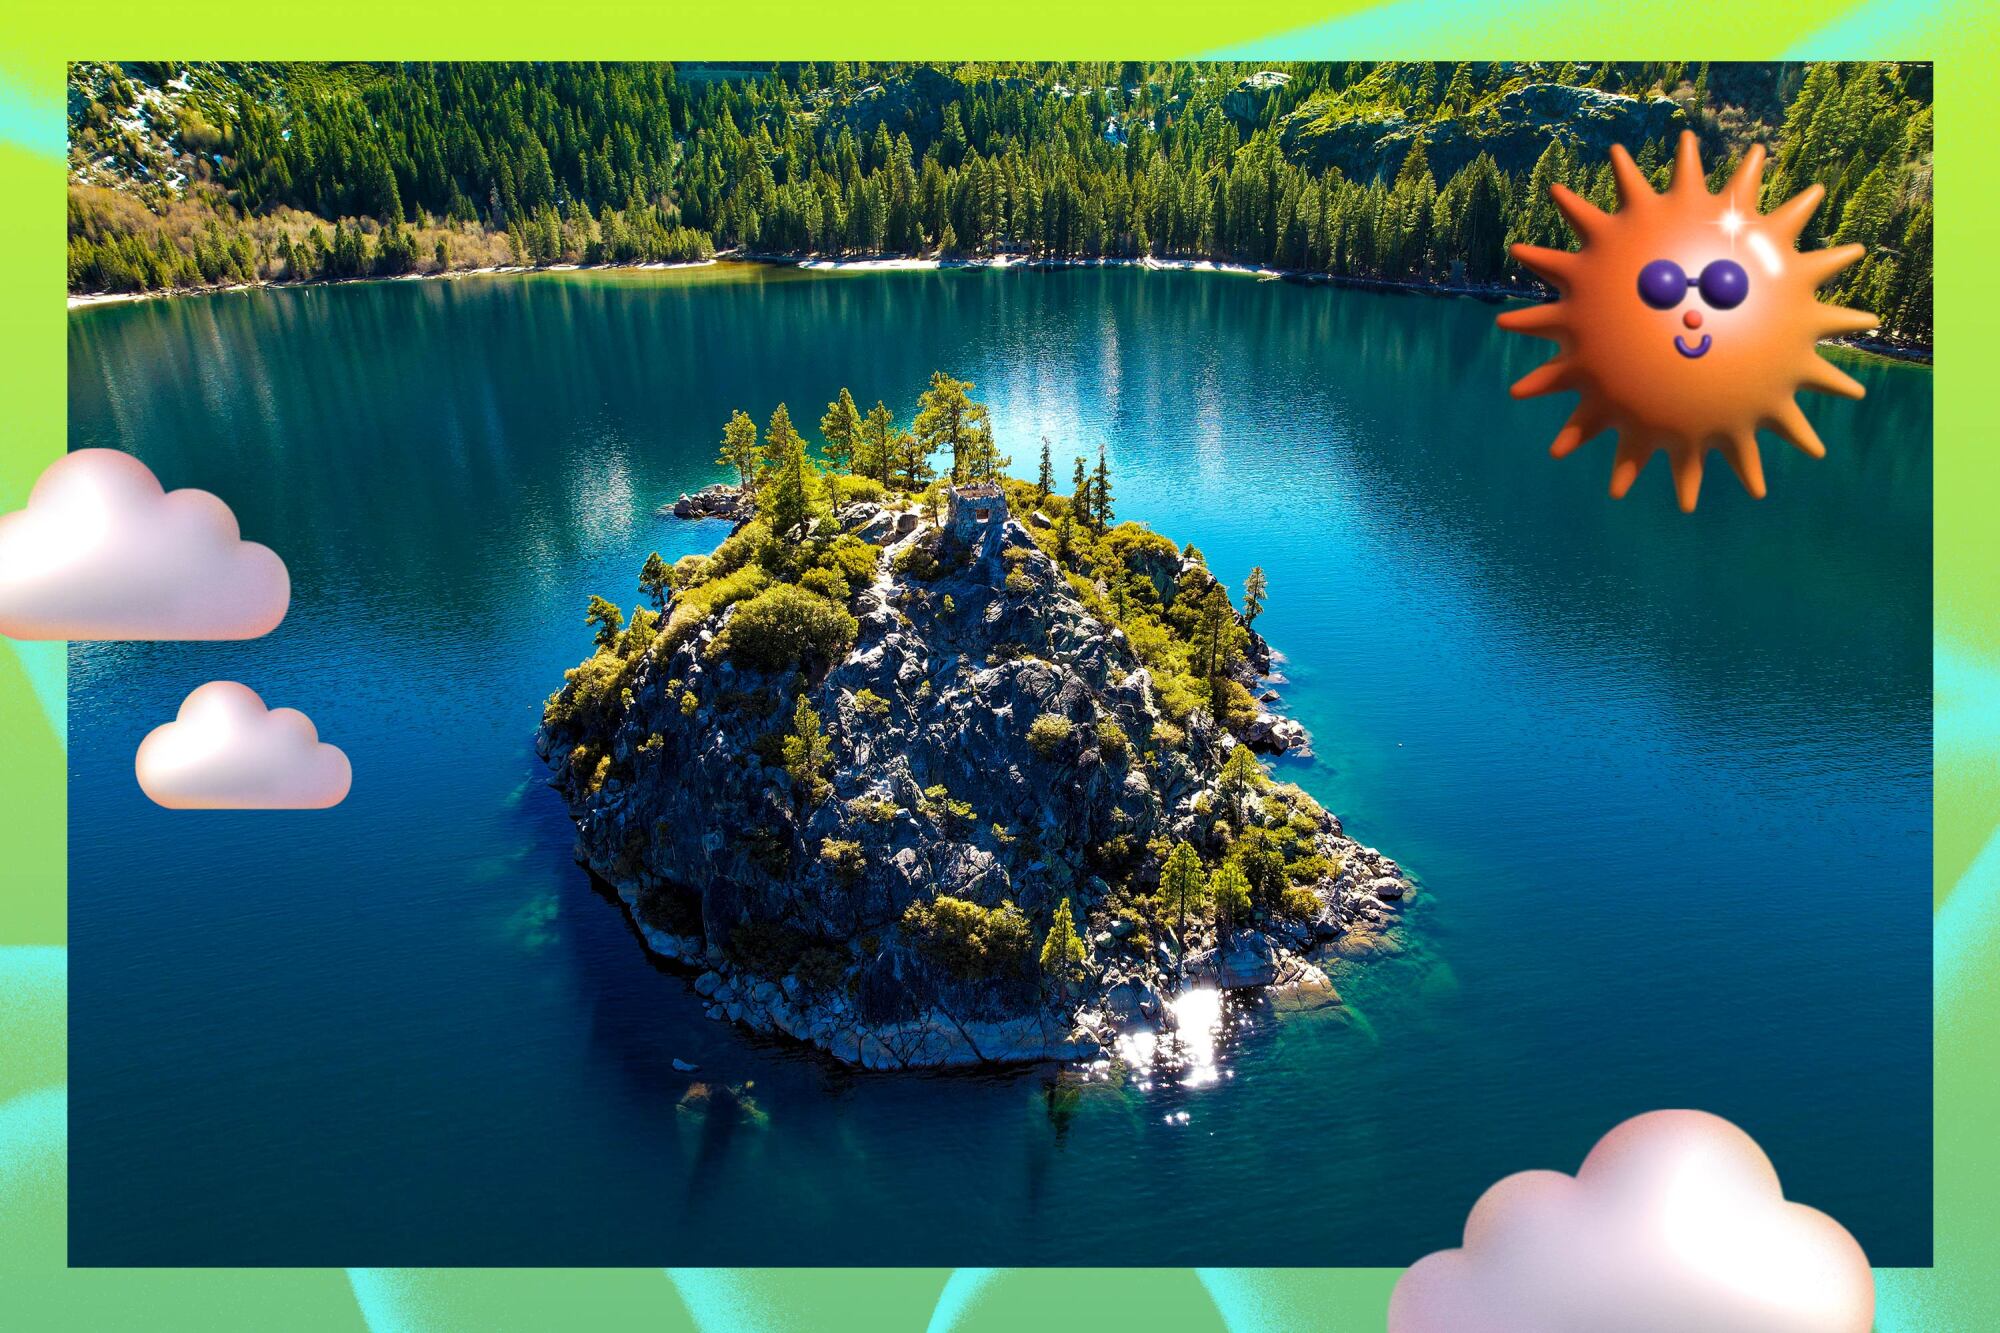 A small island in a deep blue lake, near a forested shore, with illustrated sun and clouds hanging over it.